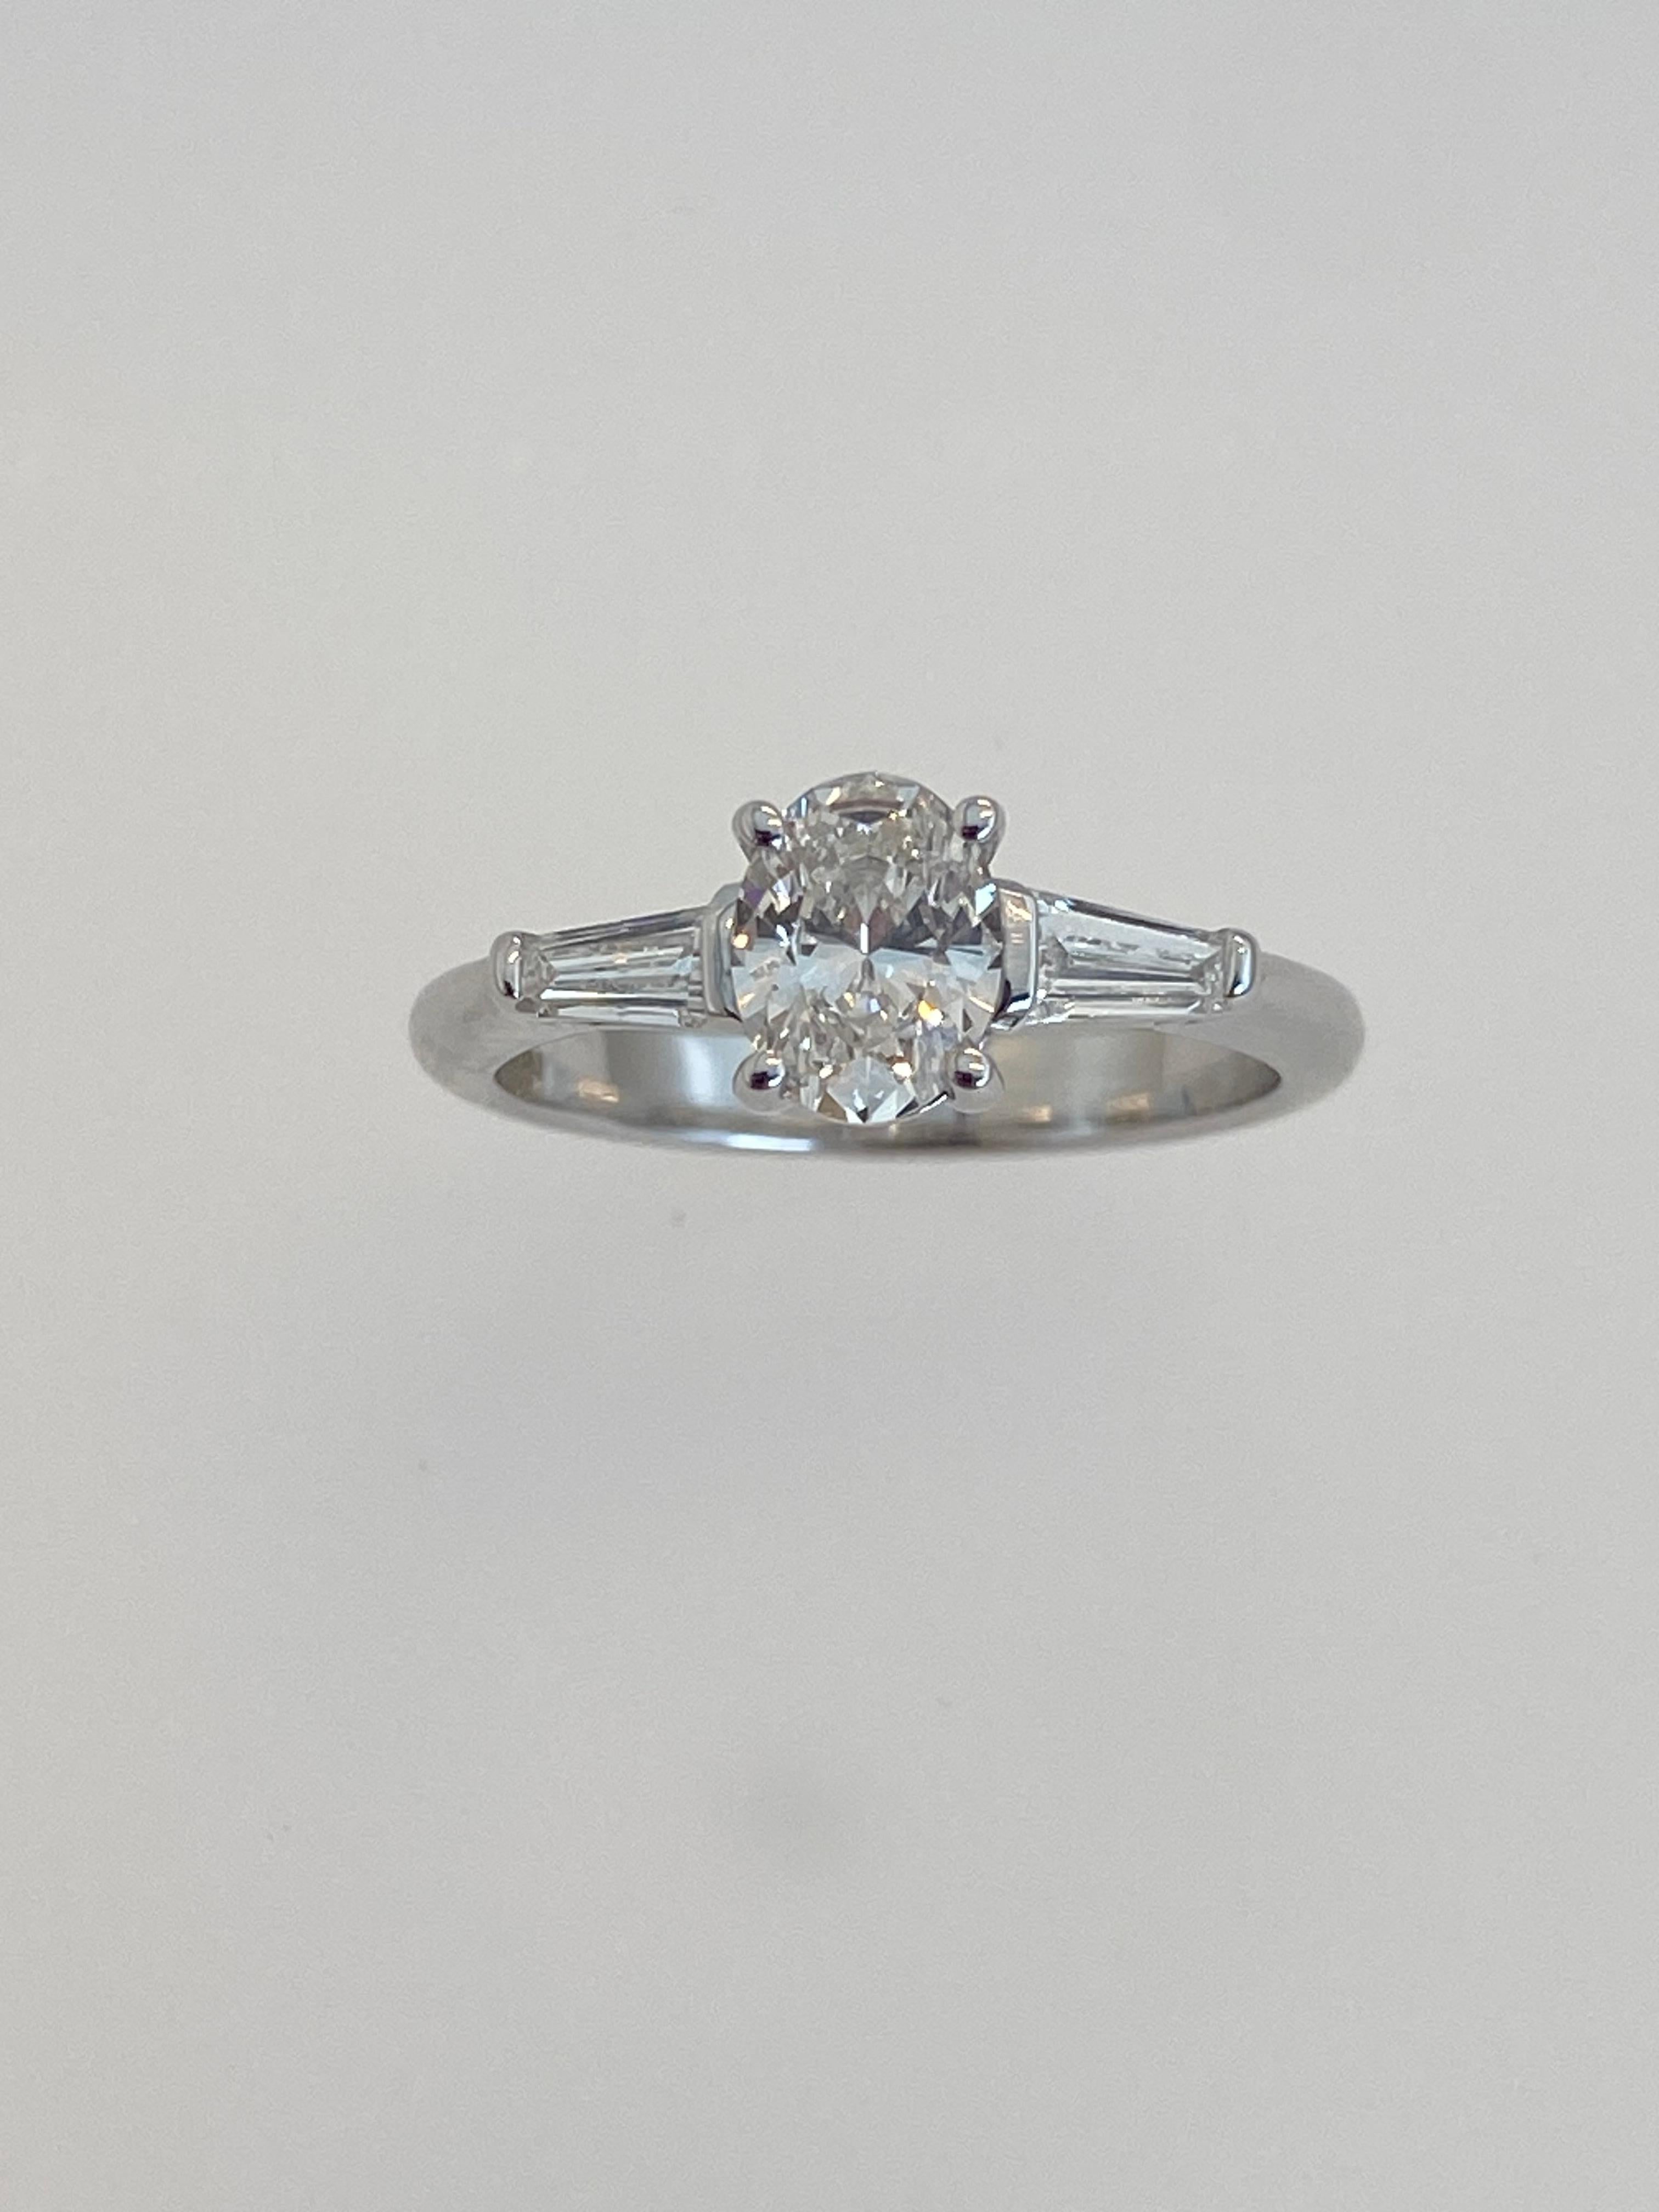 Solitaire ring ct 0.79 oval cut with two side diamonds ct 0.30 
18 kt white gold , gr 3.95 
Misura 14, possibilità su richiesta di messa a misura

The engagement ring has a meaning that sets it apart and differentiates it from other designs. 
In